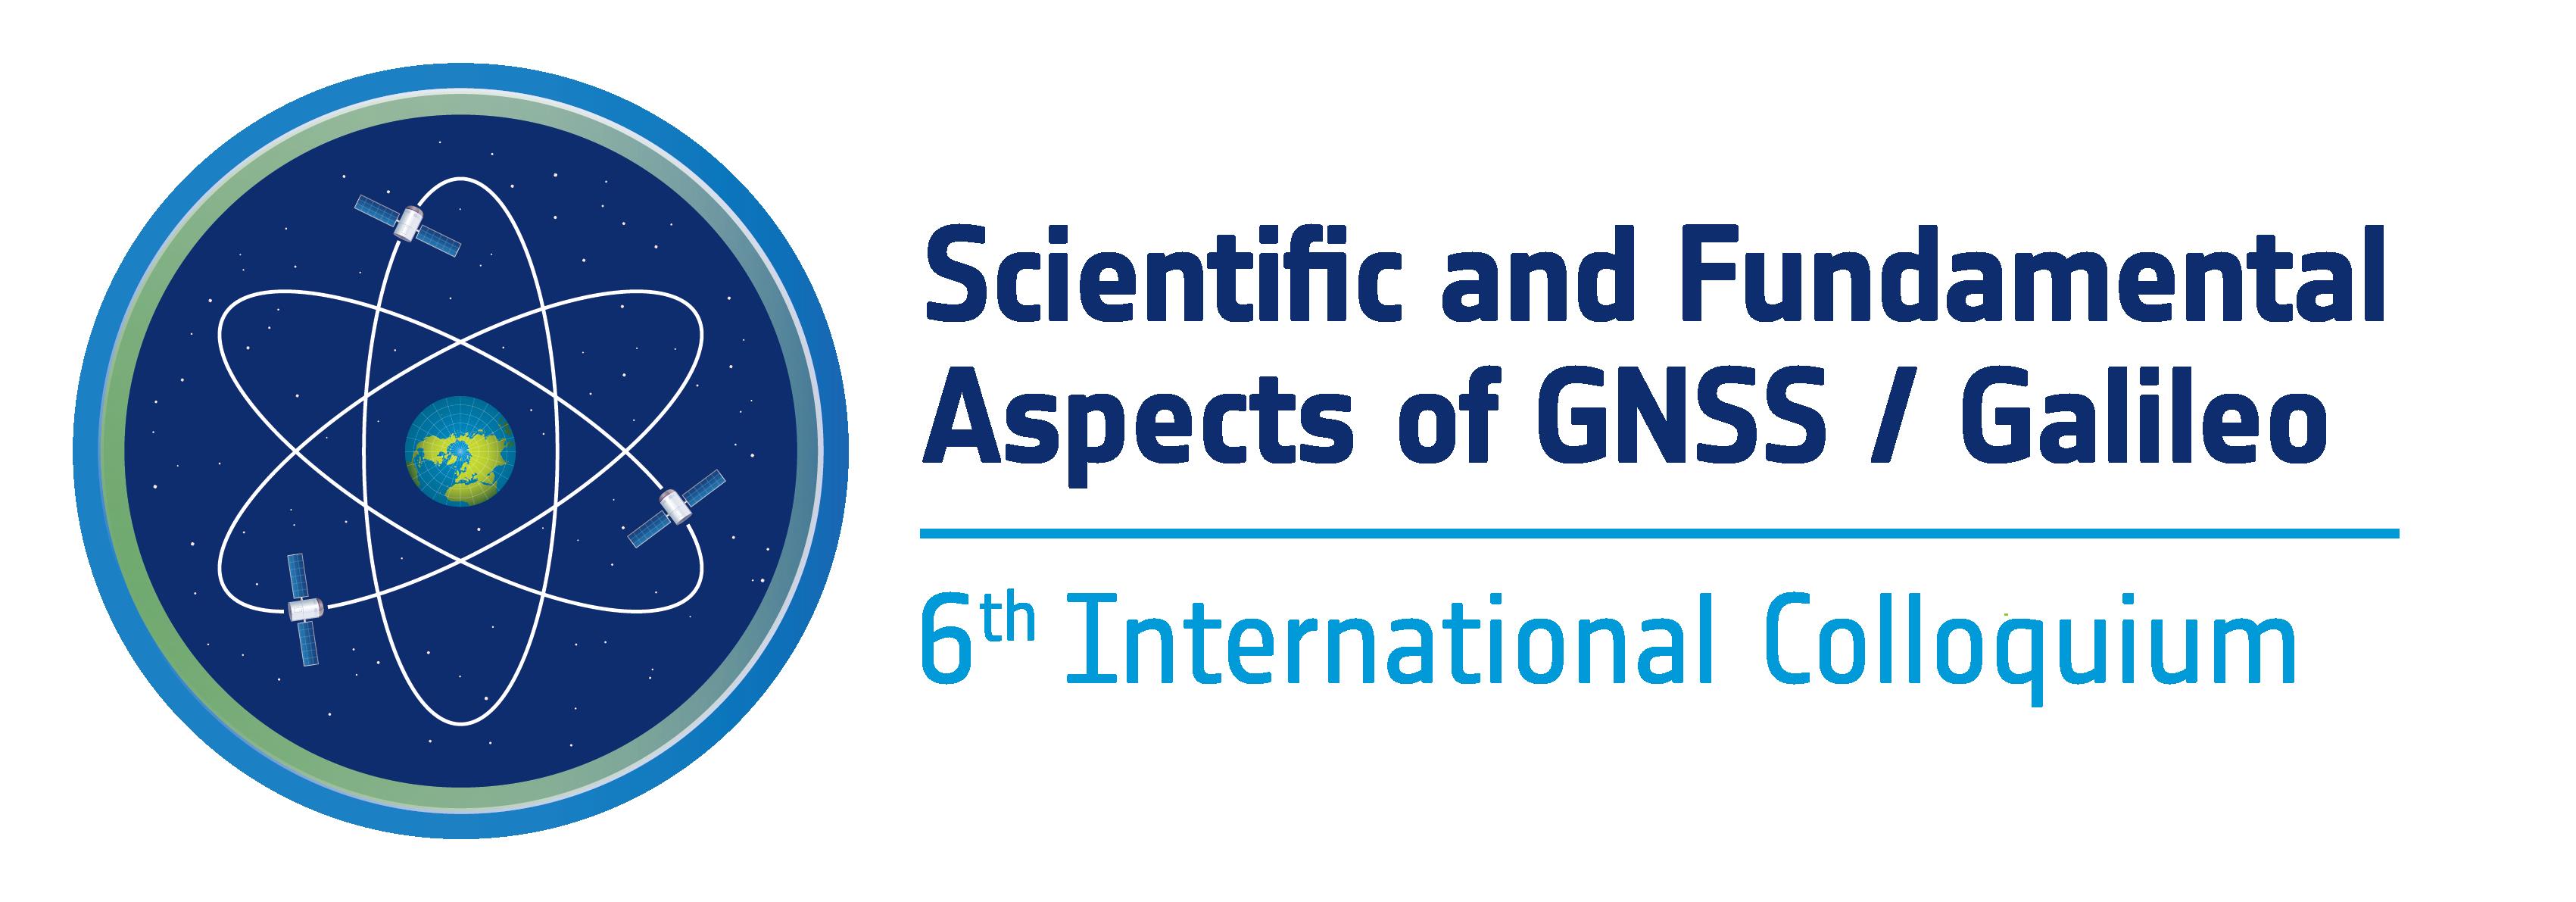 6th International Colloquium Scientific and Fundamental Aspects of GNSS / Galileo